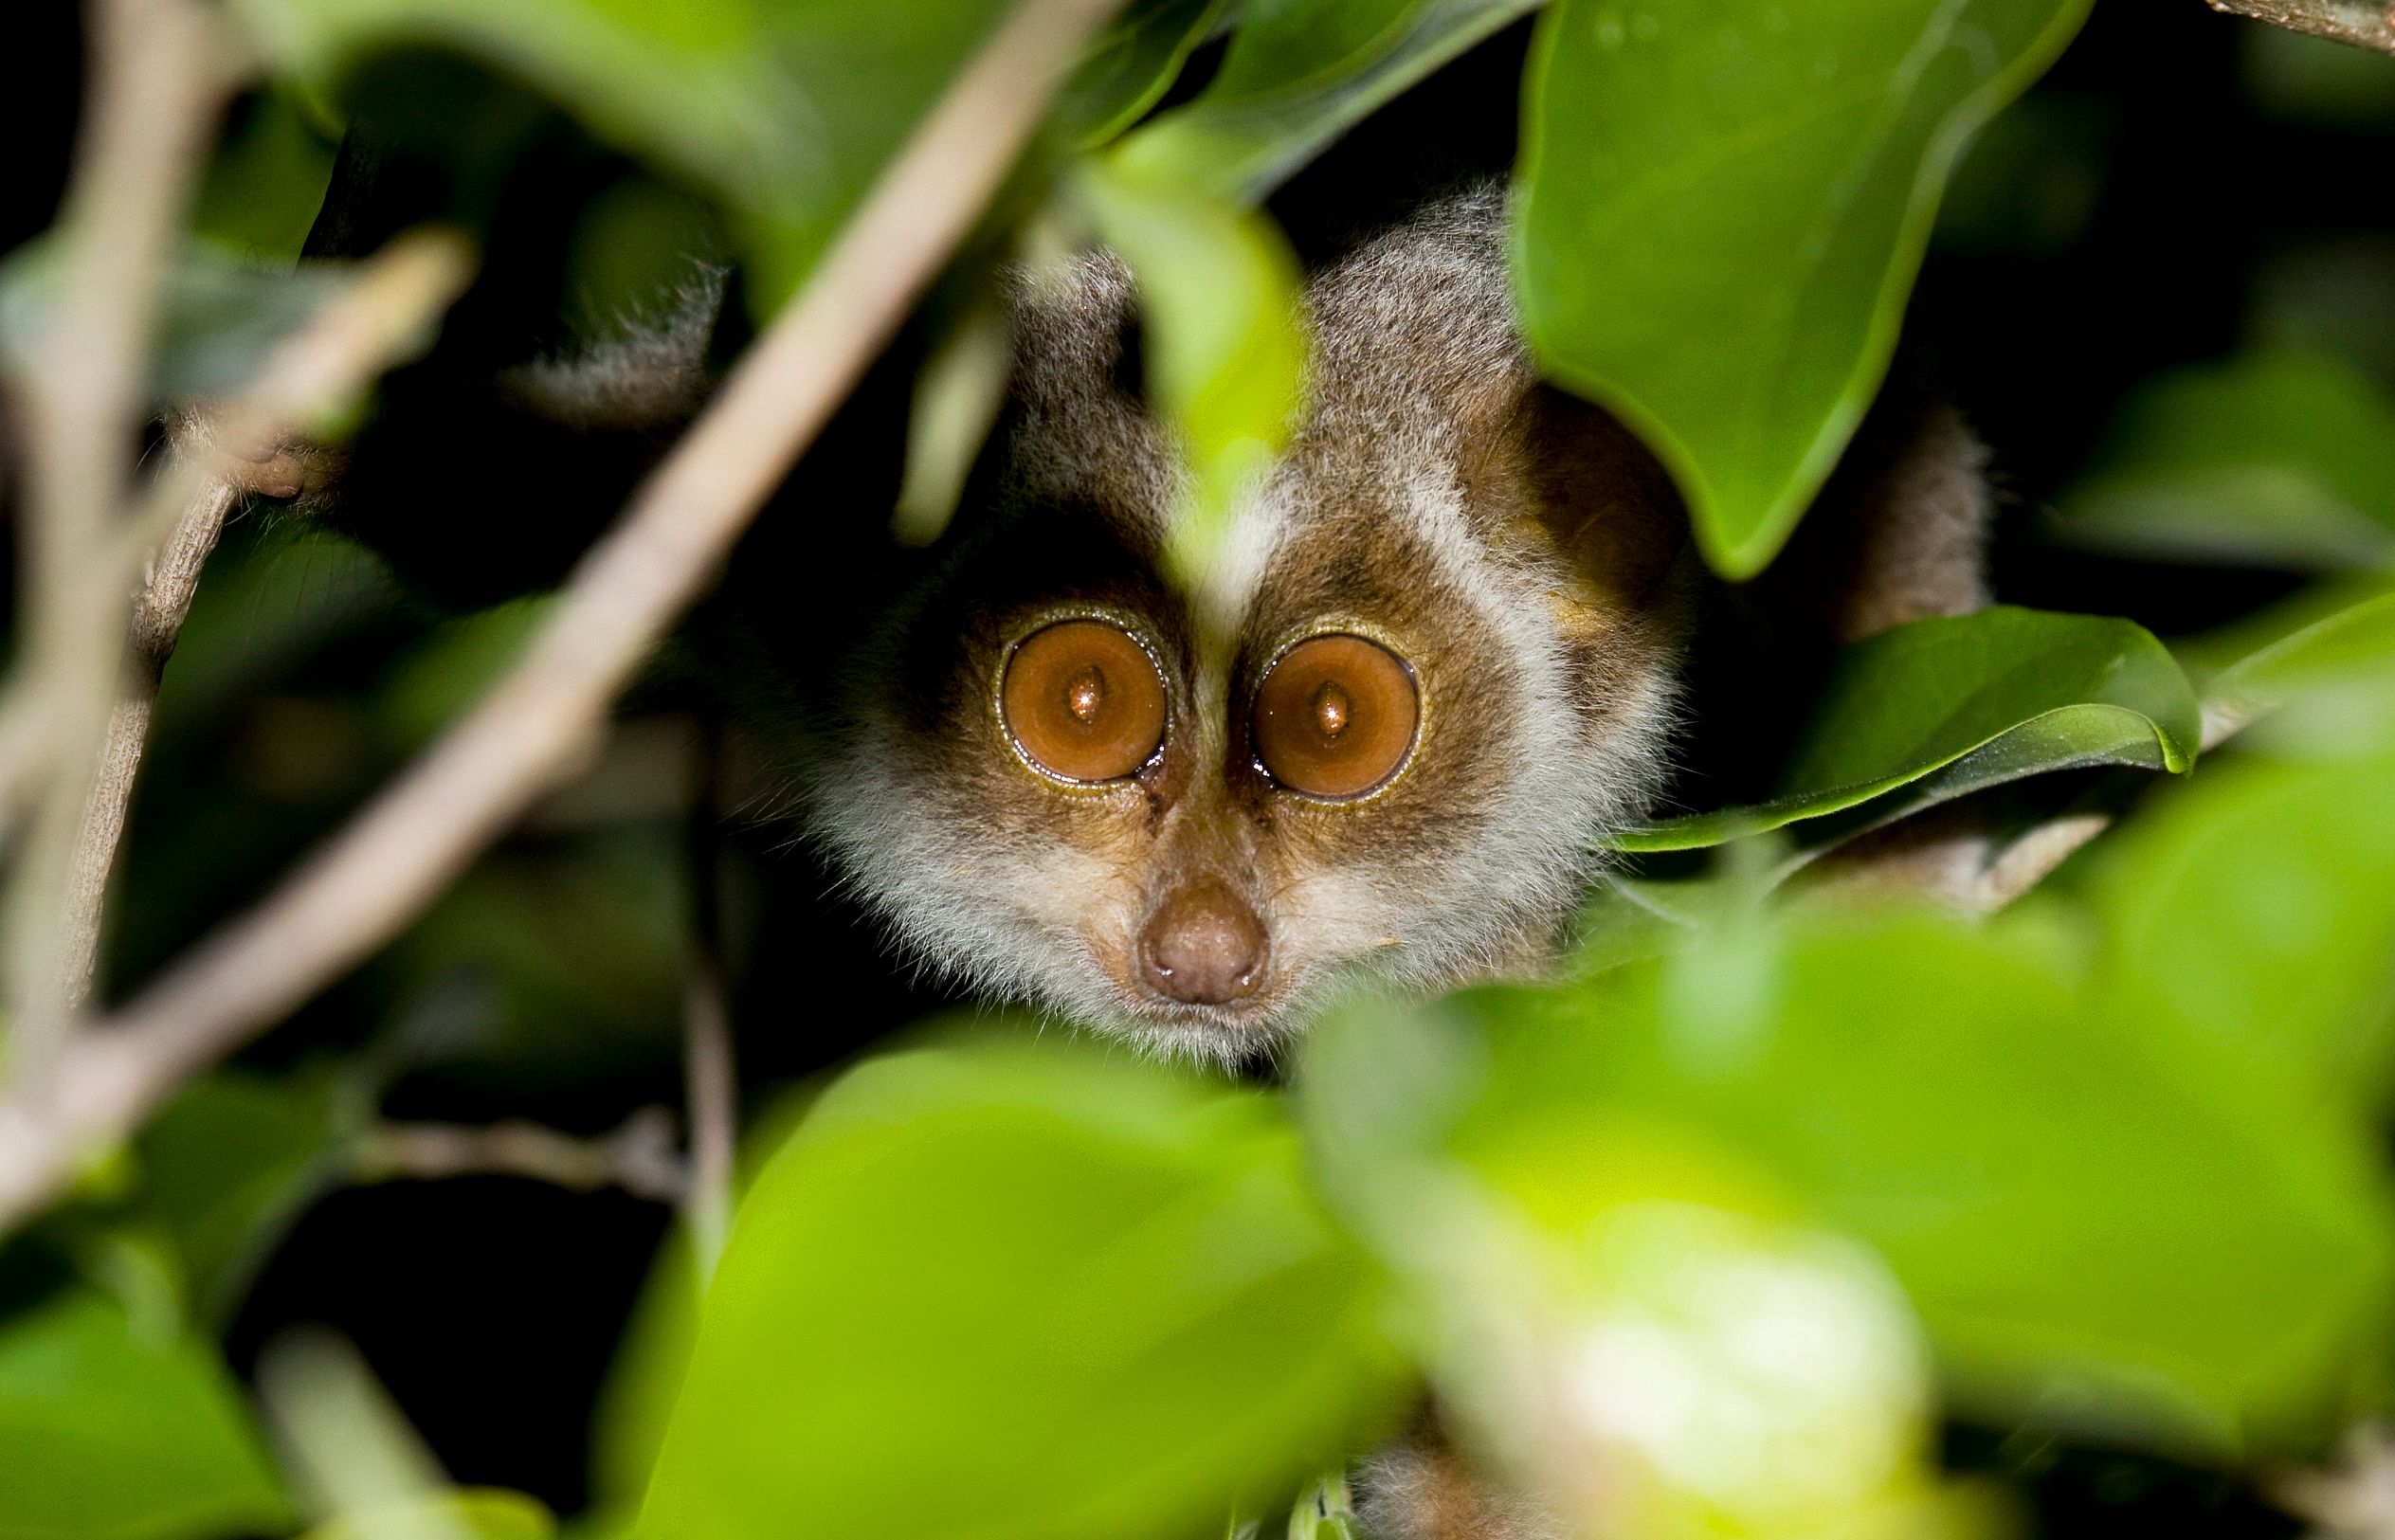 The forward set eyes of the loris surely leave an impression if one is to come face-to-face with the animal, which hardly ever occurs in the natural setting. PHOTO COURTESY: N A NASEER